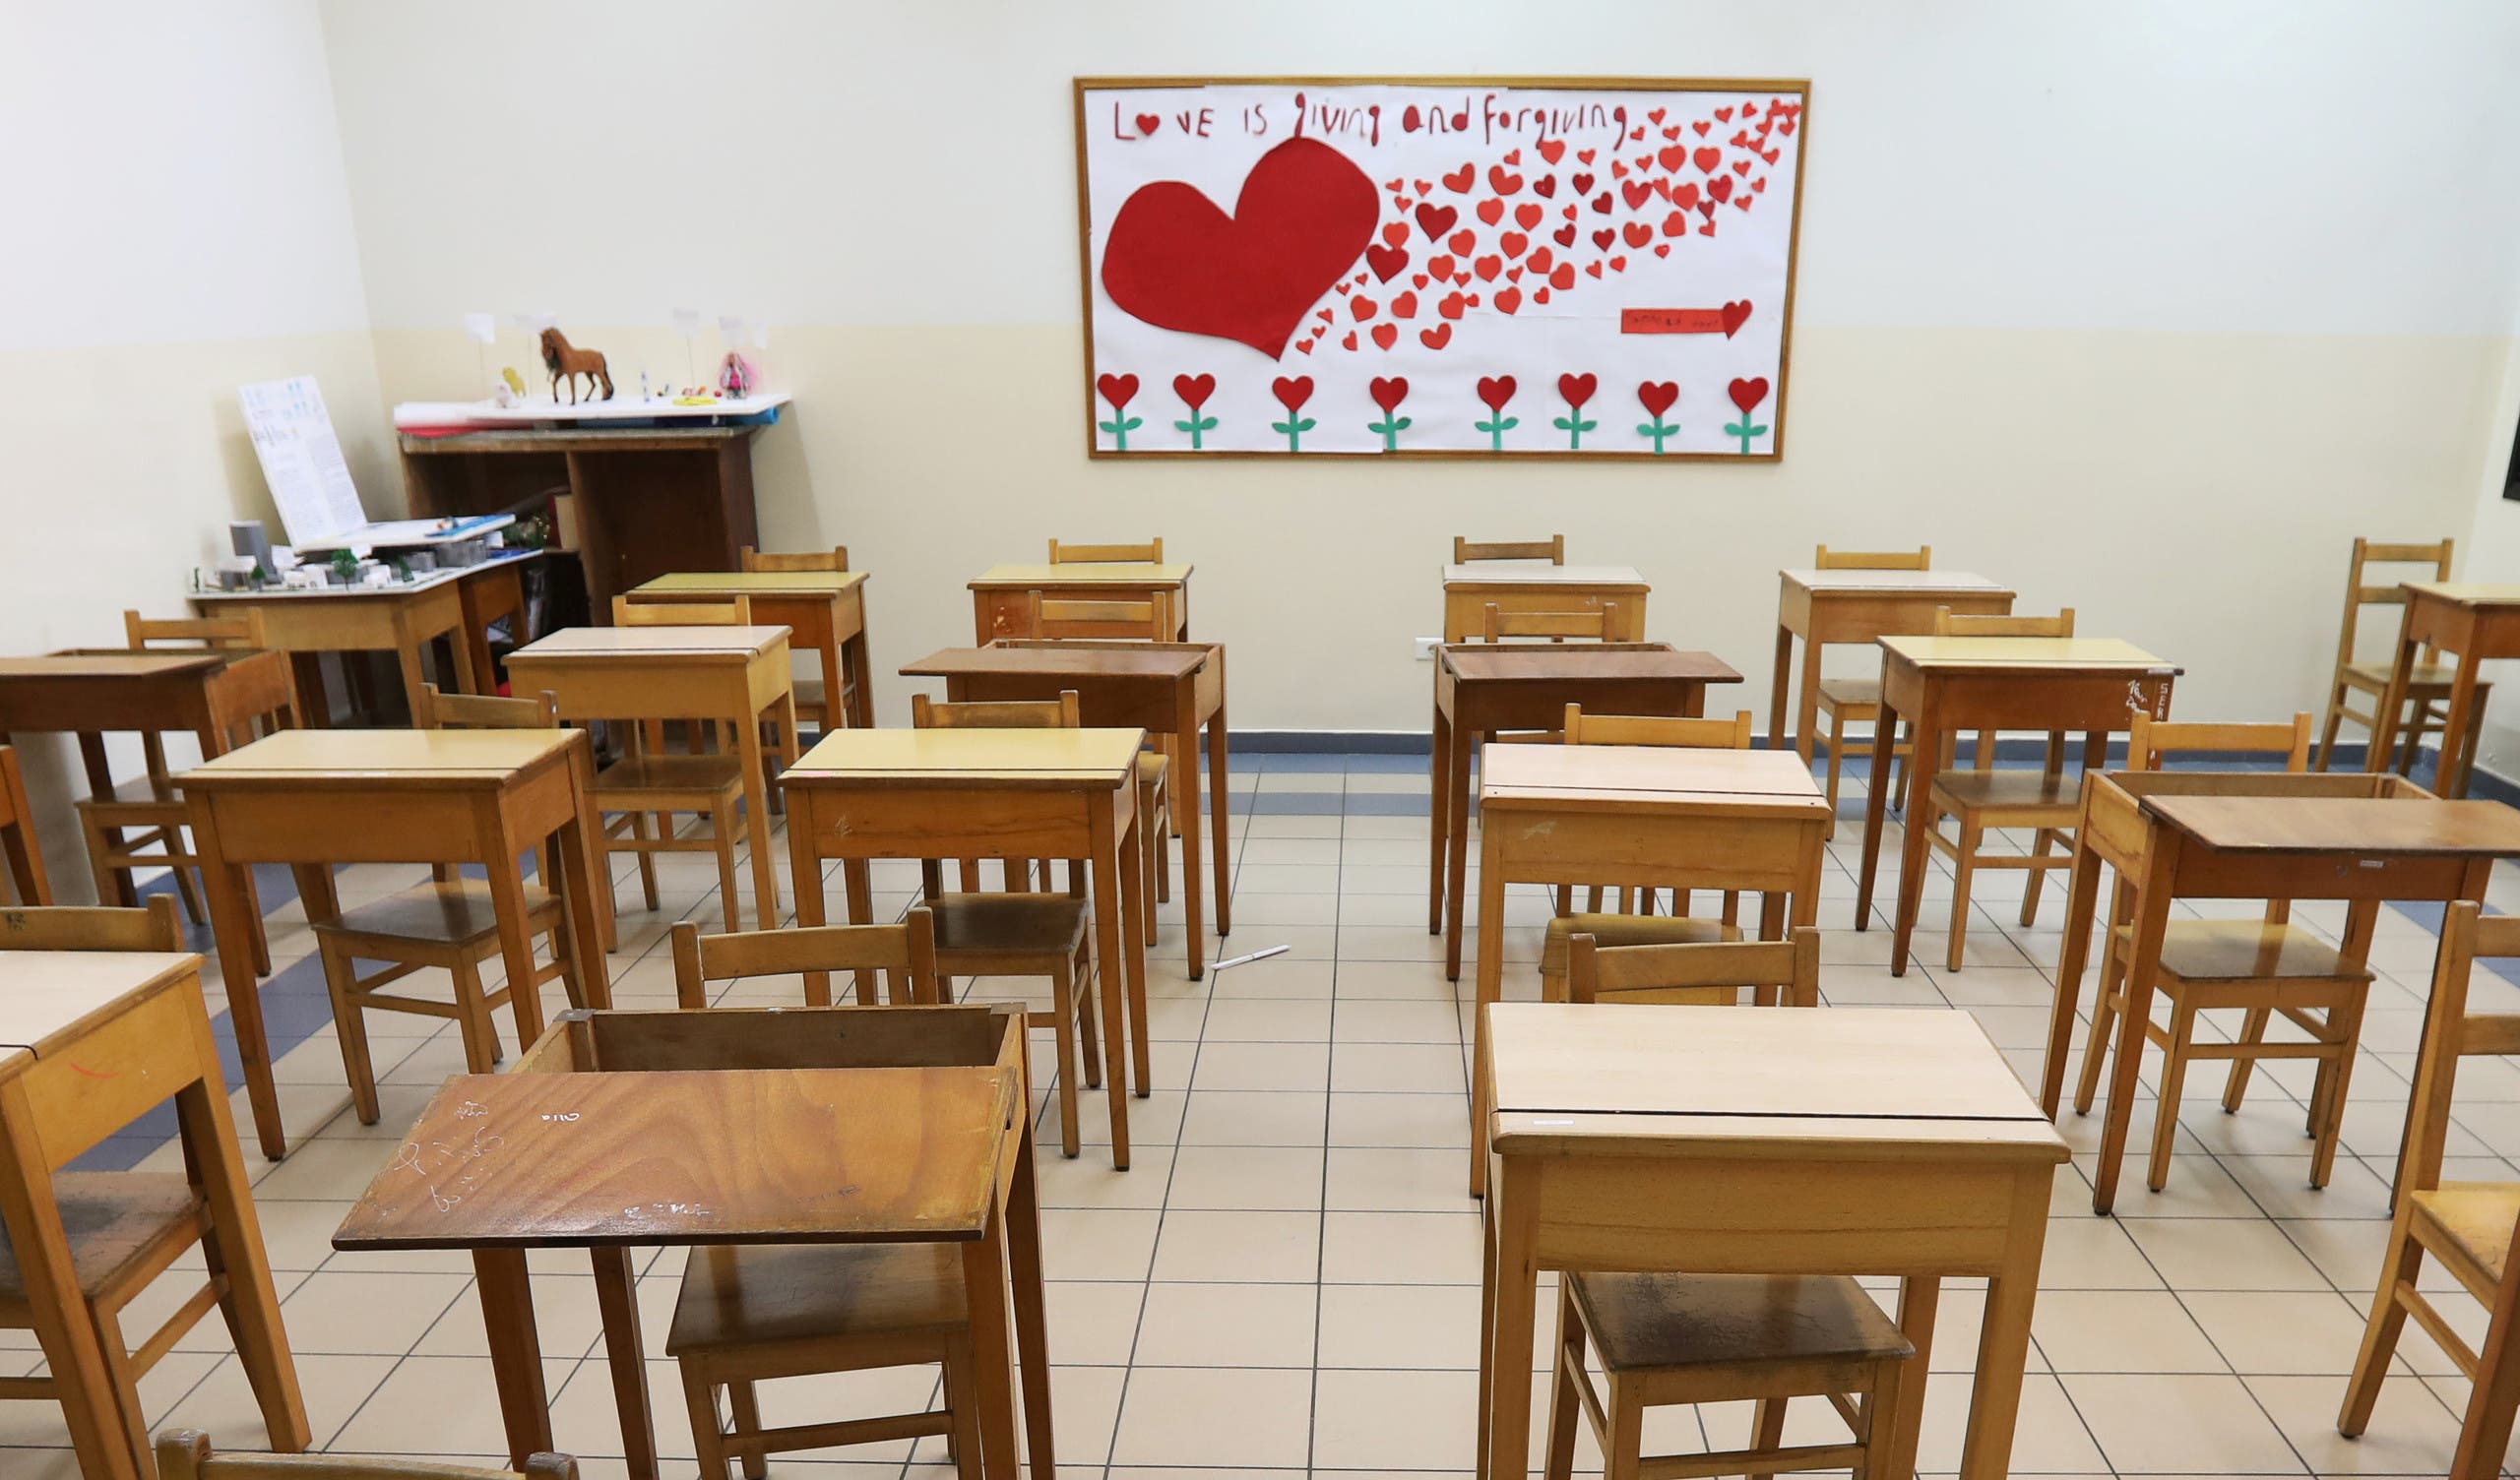 A view of an empty classroom at a school, as Lebanon's education system is in limbo with multiple challenges, in Beirut, Lebanon, June 8, 2020. (Reuters)